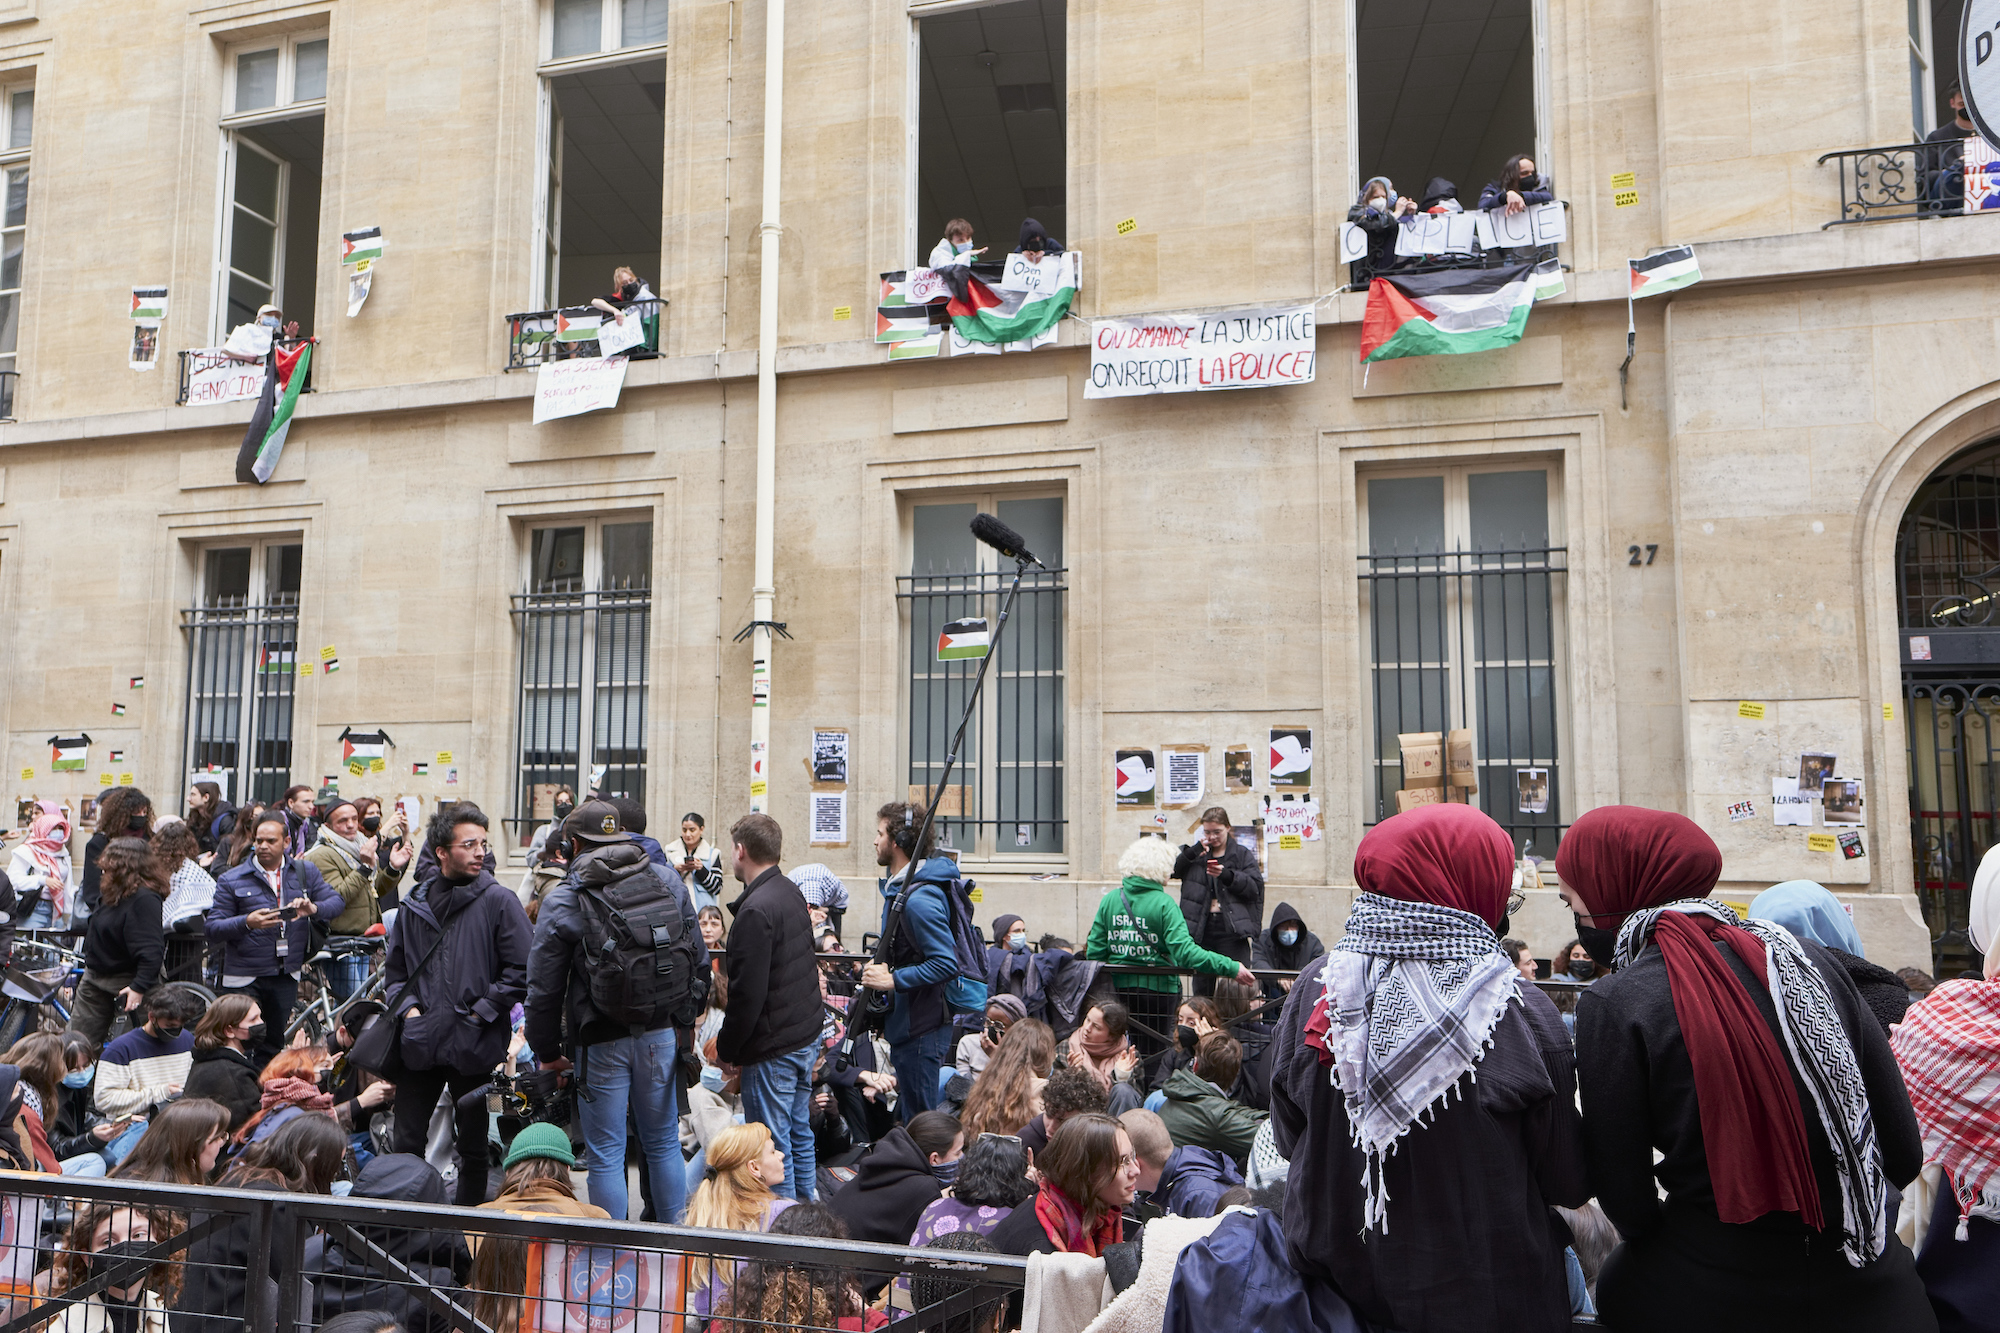  Students are seen in front of the Sciences Po University in Paris on Friday.